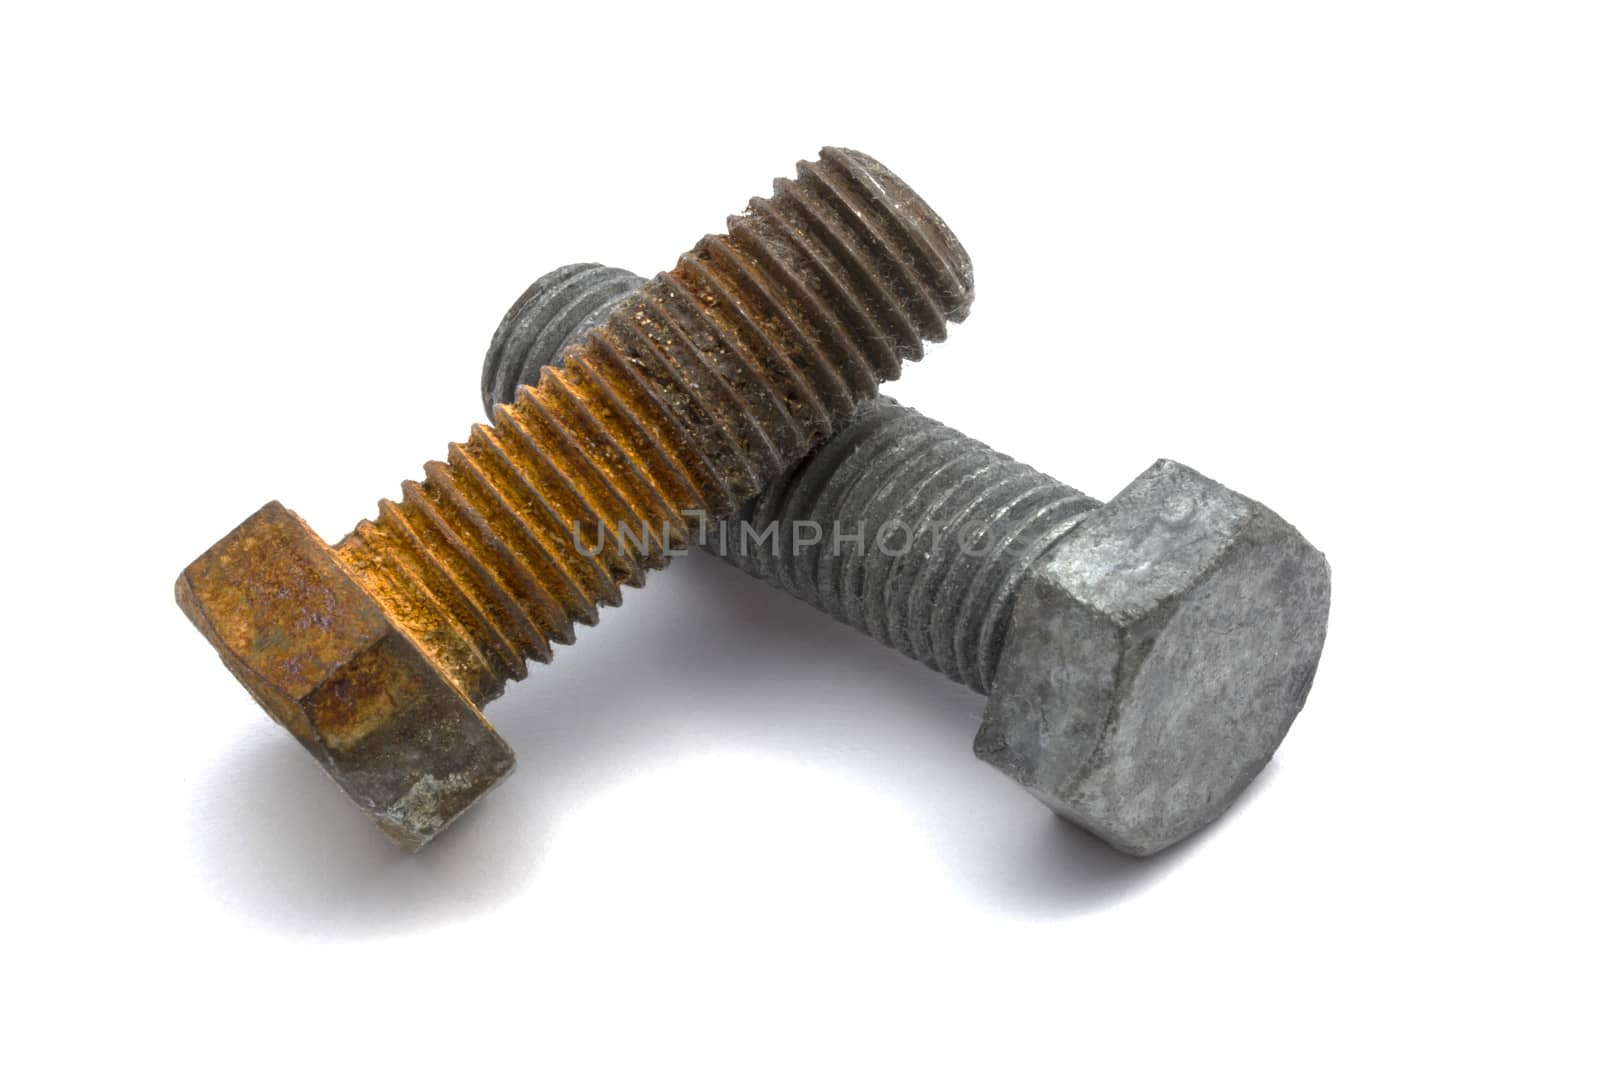 Rusty nut and bolt by ibphoto